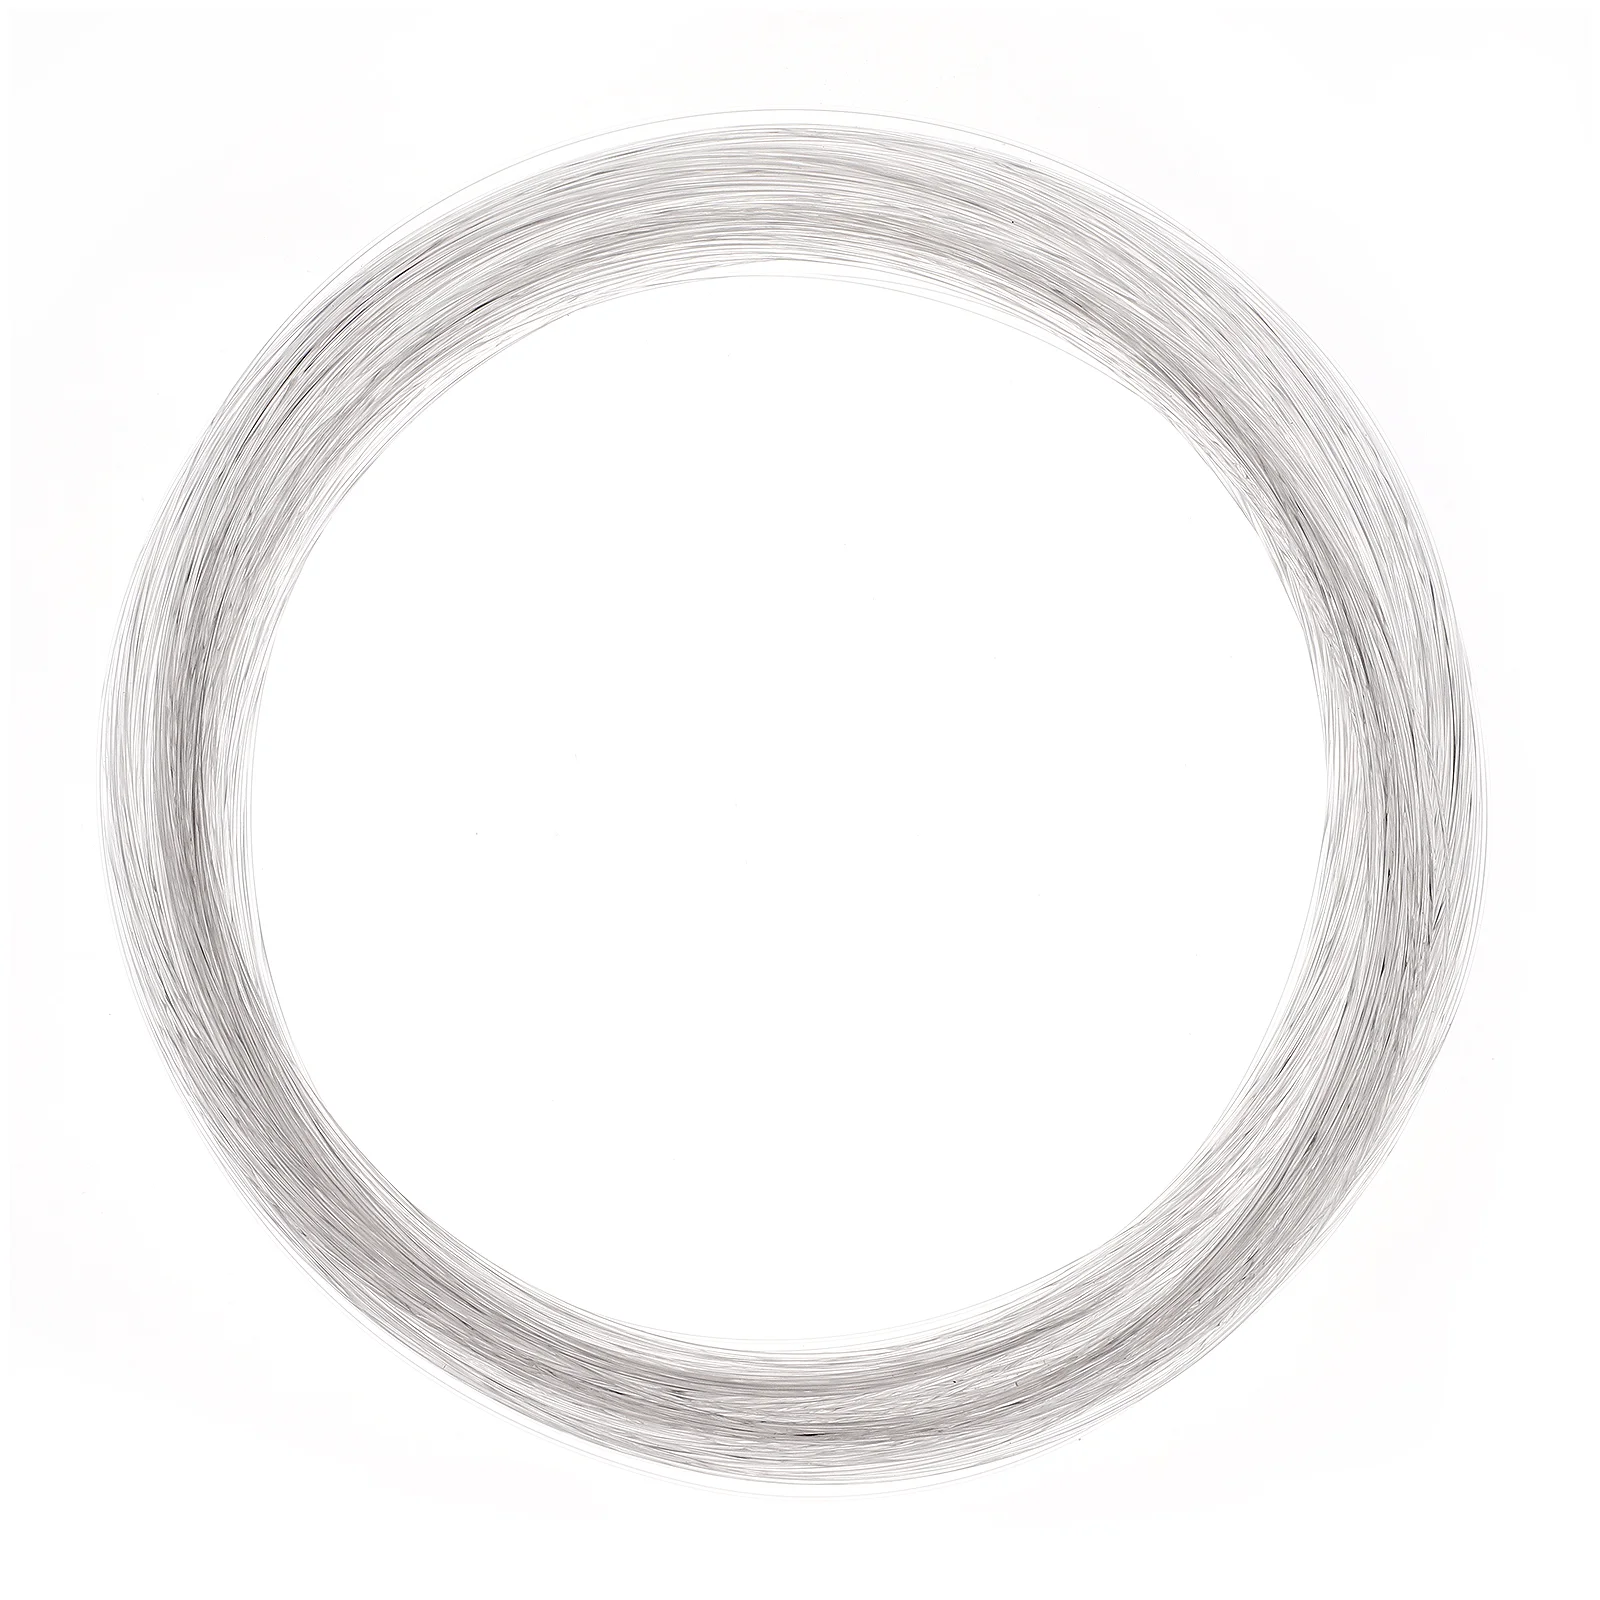 OSALADI 075mm 100 Meters Long Optical Fiber PMMA Plastic Glow Cable for Star Sky Ceiling Light